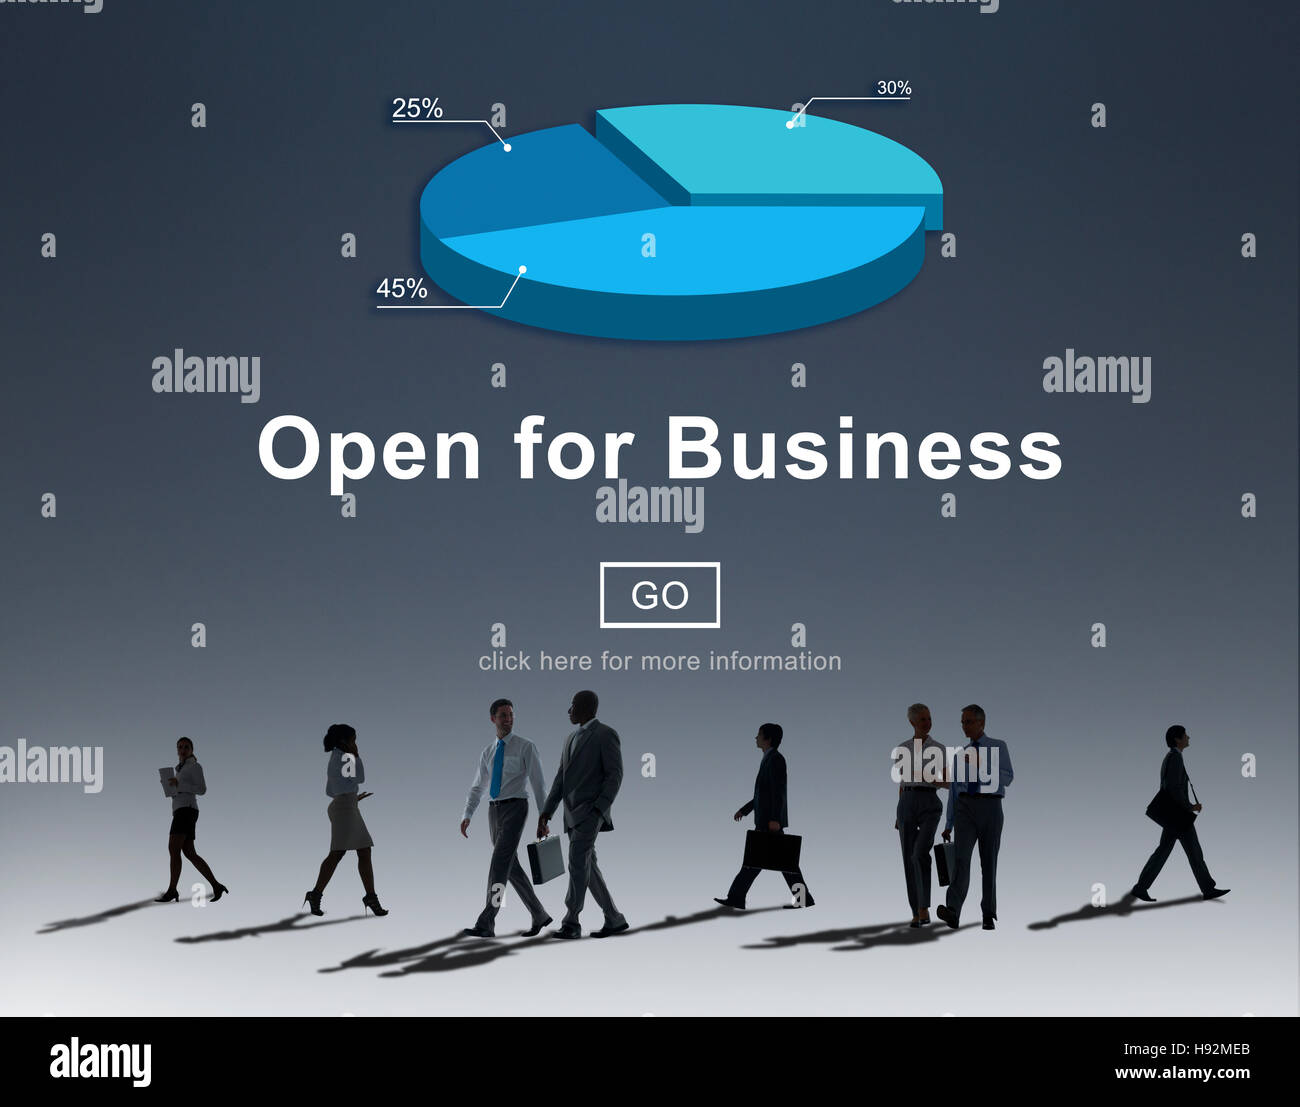 Open for Business Partnership Industry Concept Stock Photo